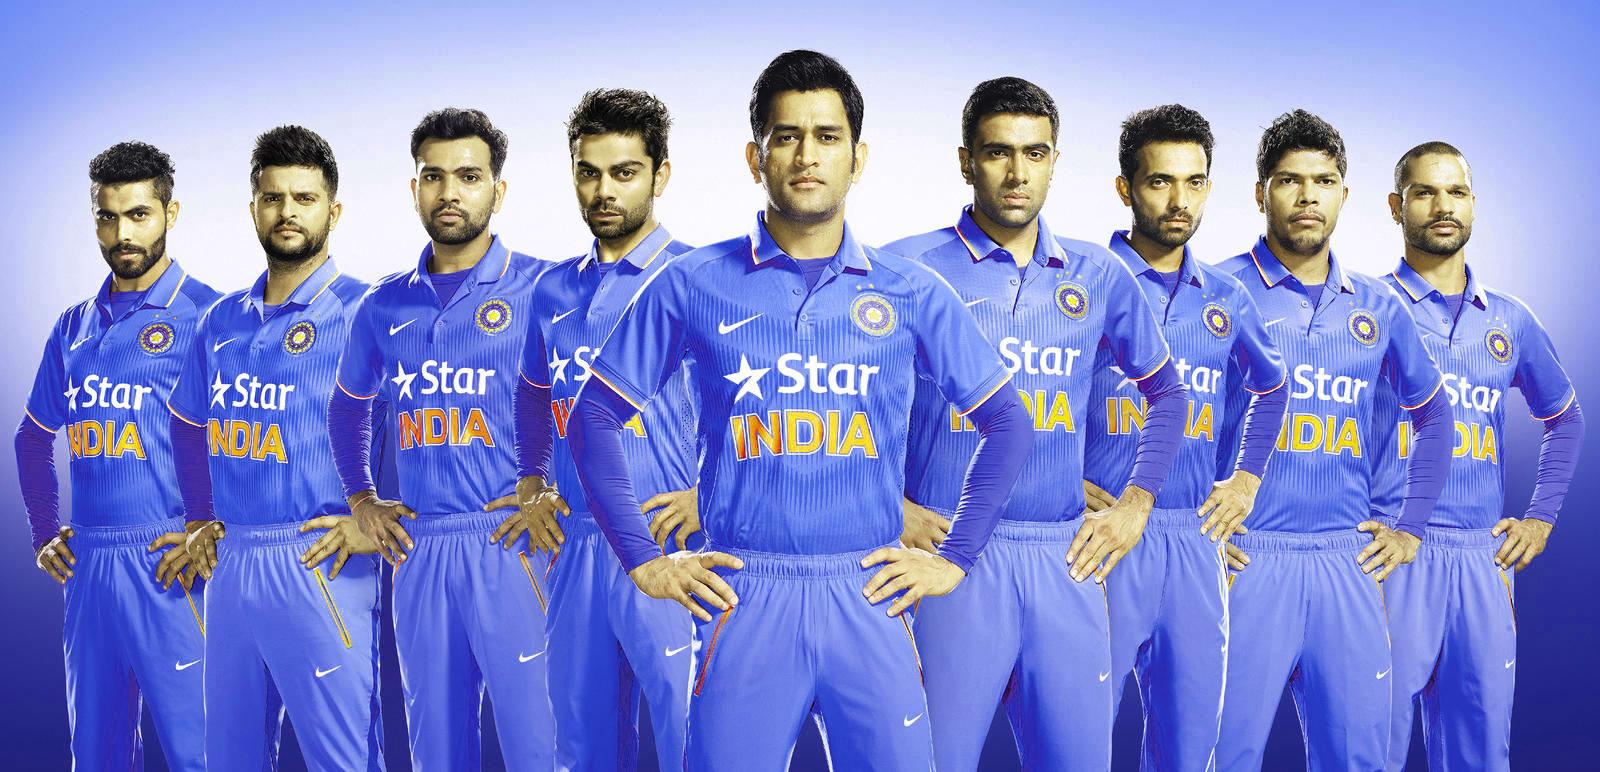 Indian Cricket Team Player Image Wallpaper Photo Pics for World Cup